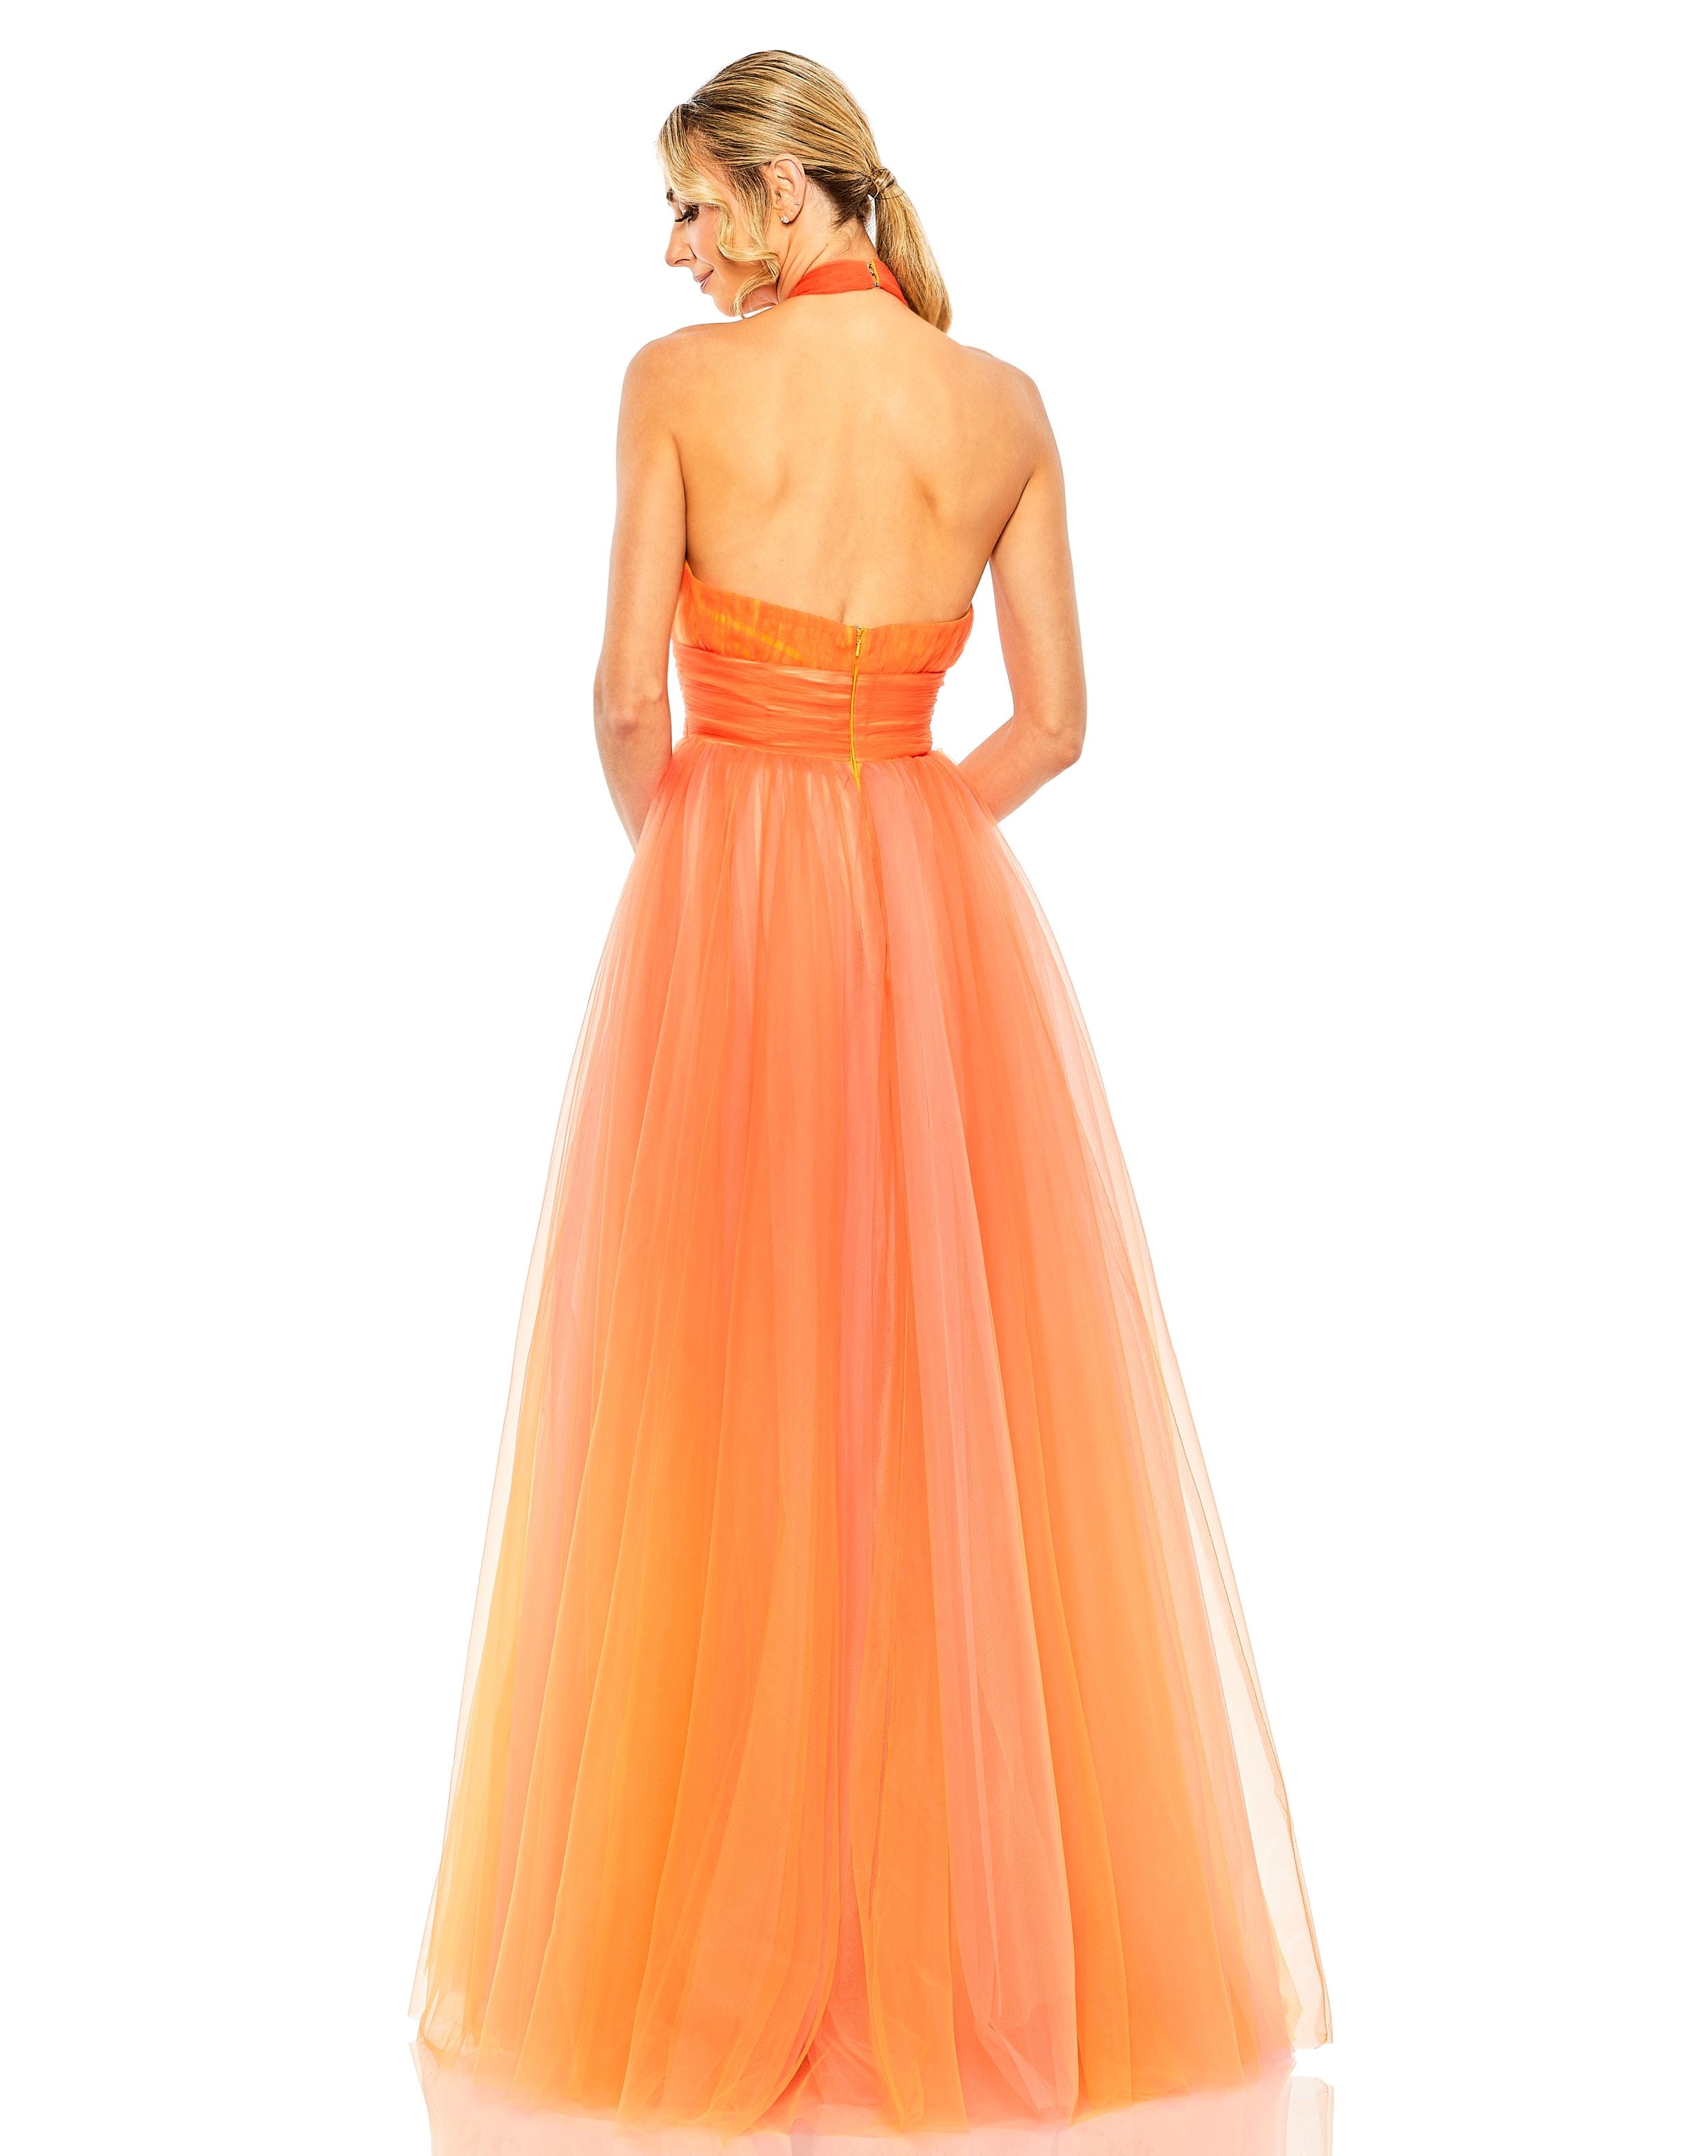 260 Best Backless evening gowns ideas  gowns, evening gowns, backless  evening gowns